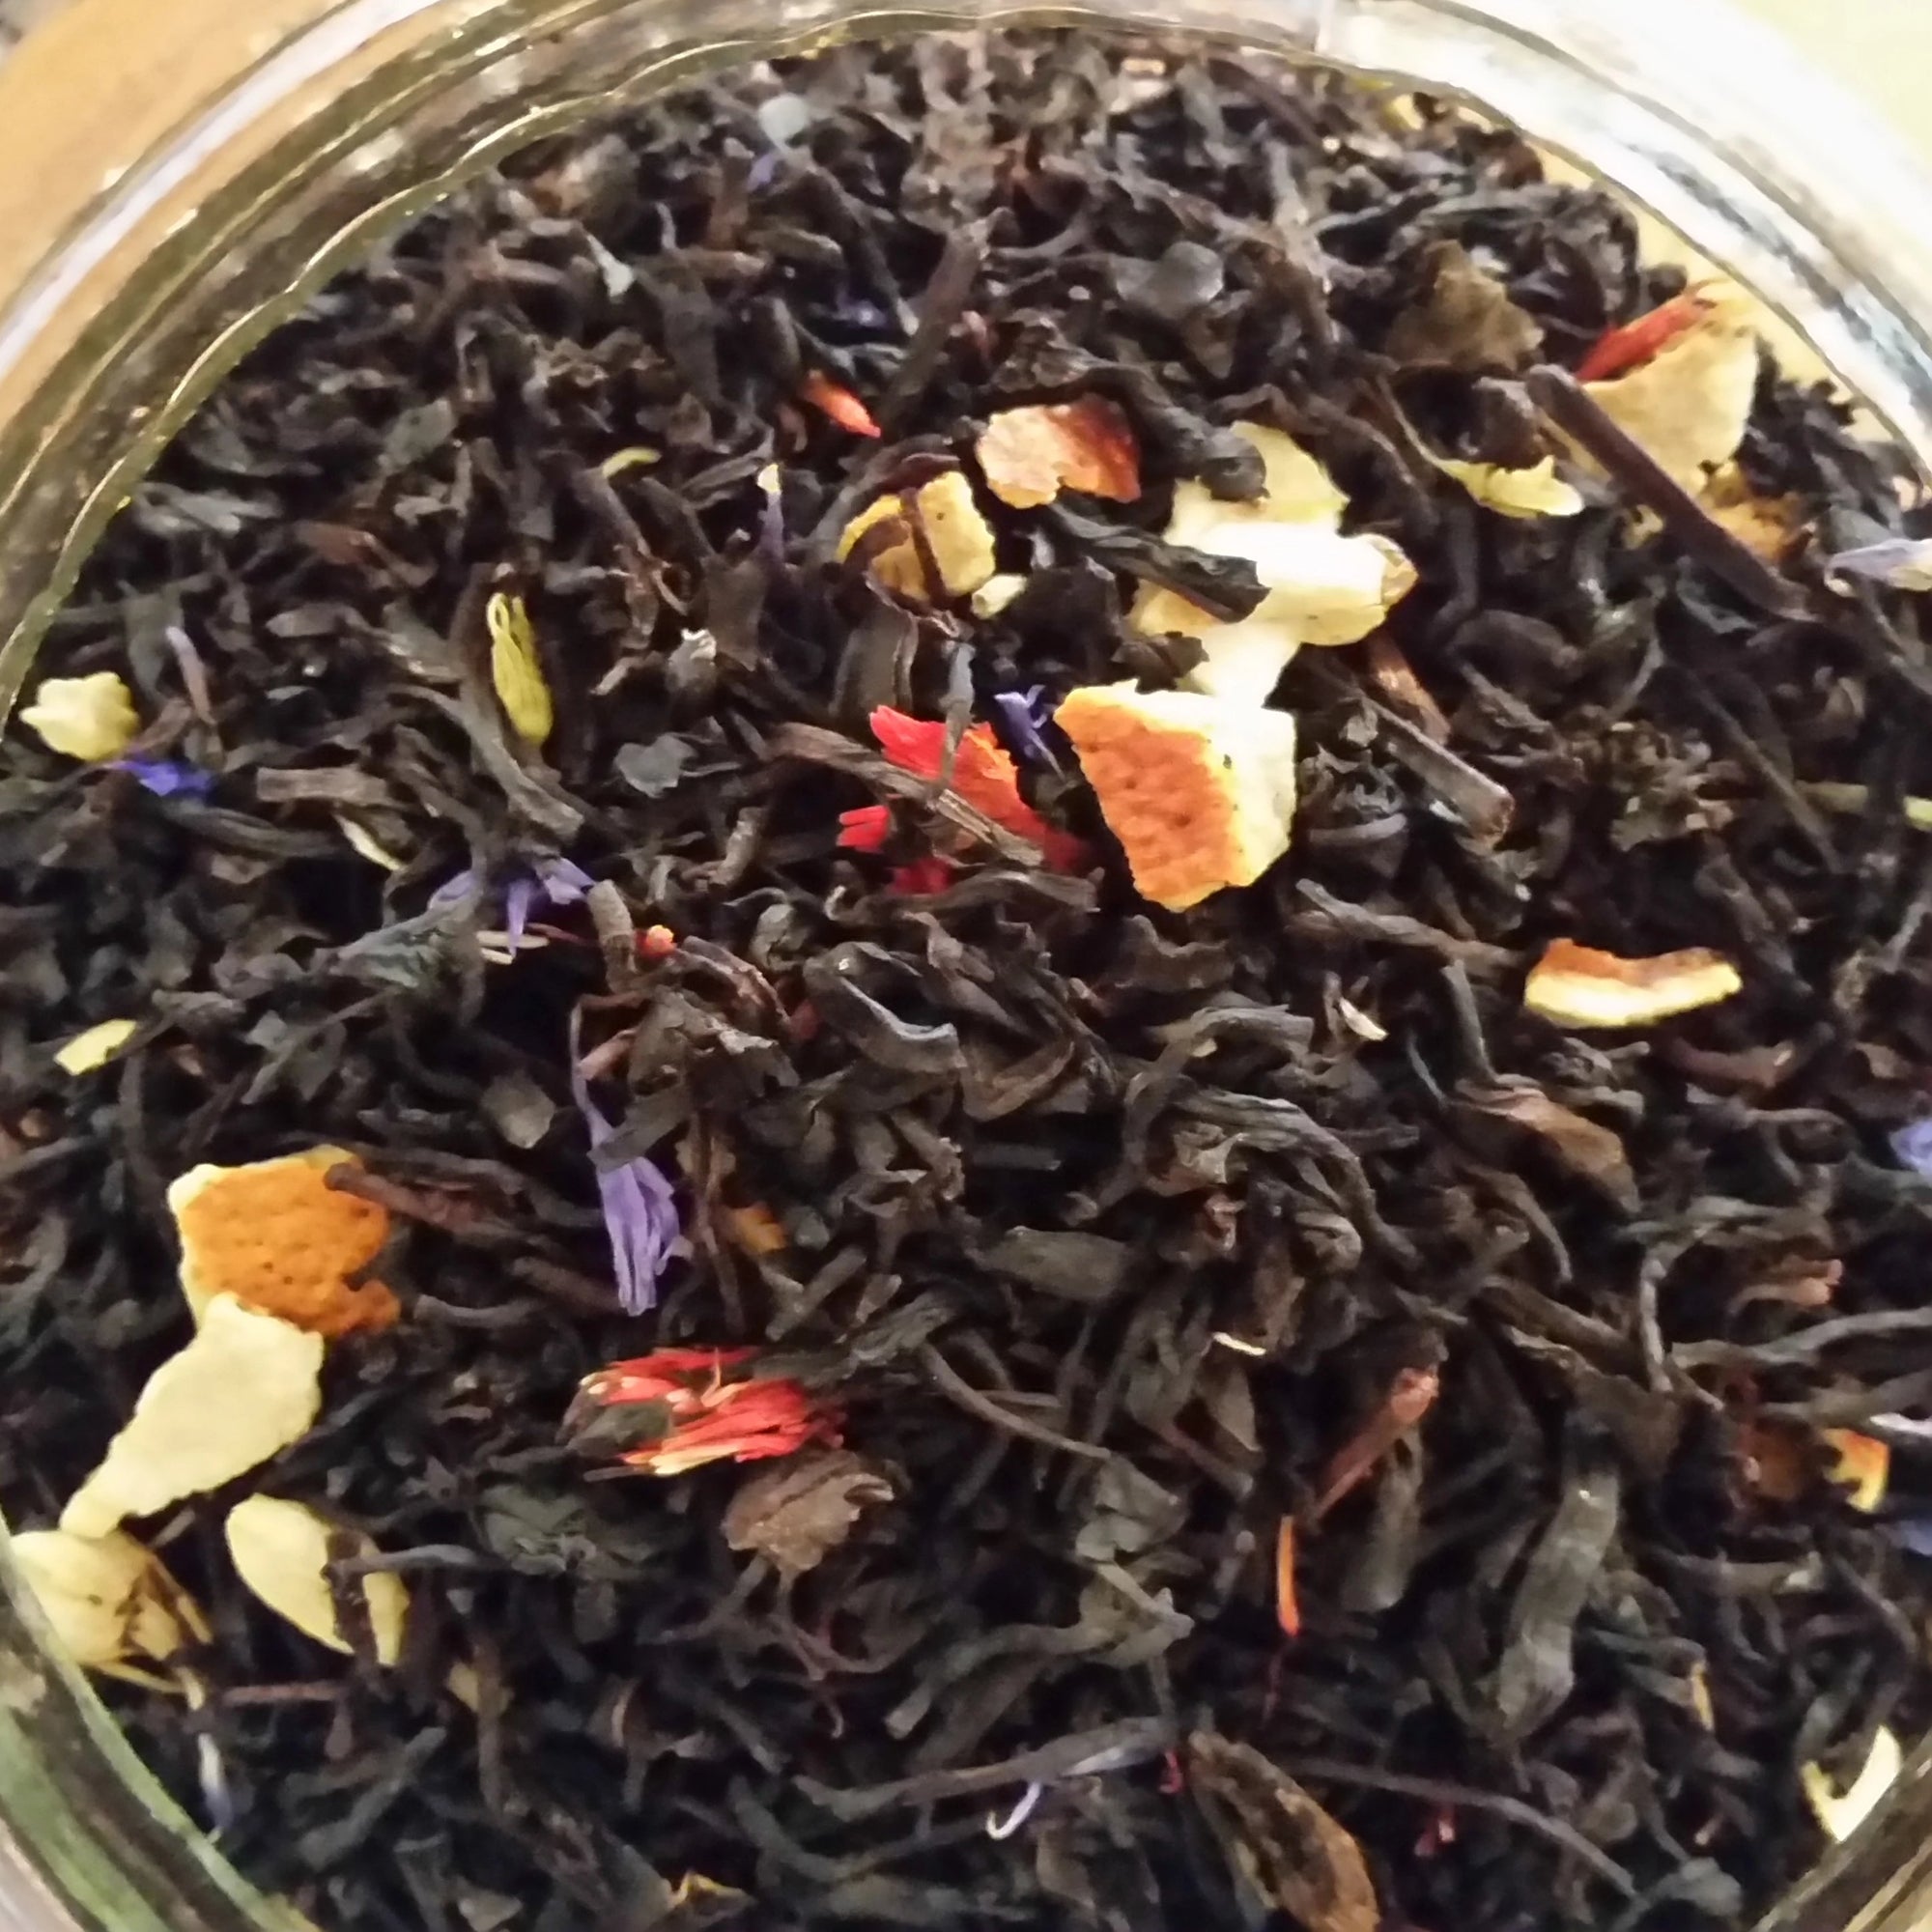 Sleigh Ride Black Tea,A delicious heart warming tea.....Taking a sleigh ride is a celebration of family and winter fun, one of the most quintessential winter activities in the glistening snow. Creamy vanilla notes warm your soul with with tea!!!!!